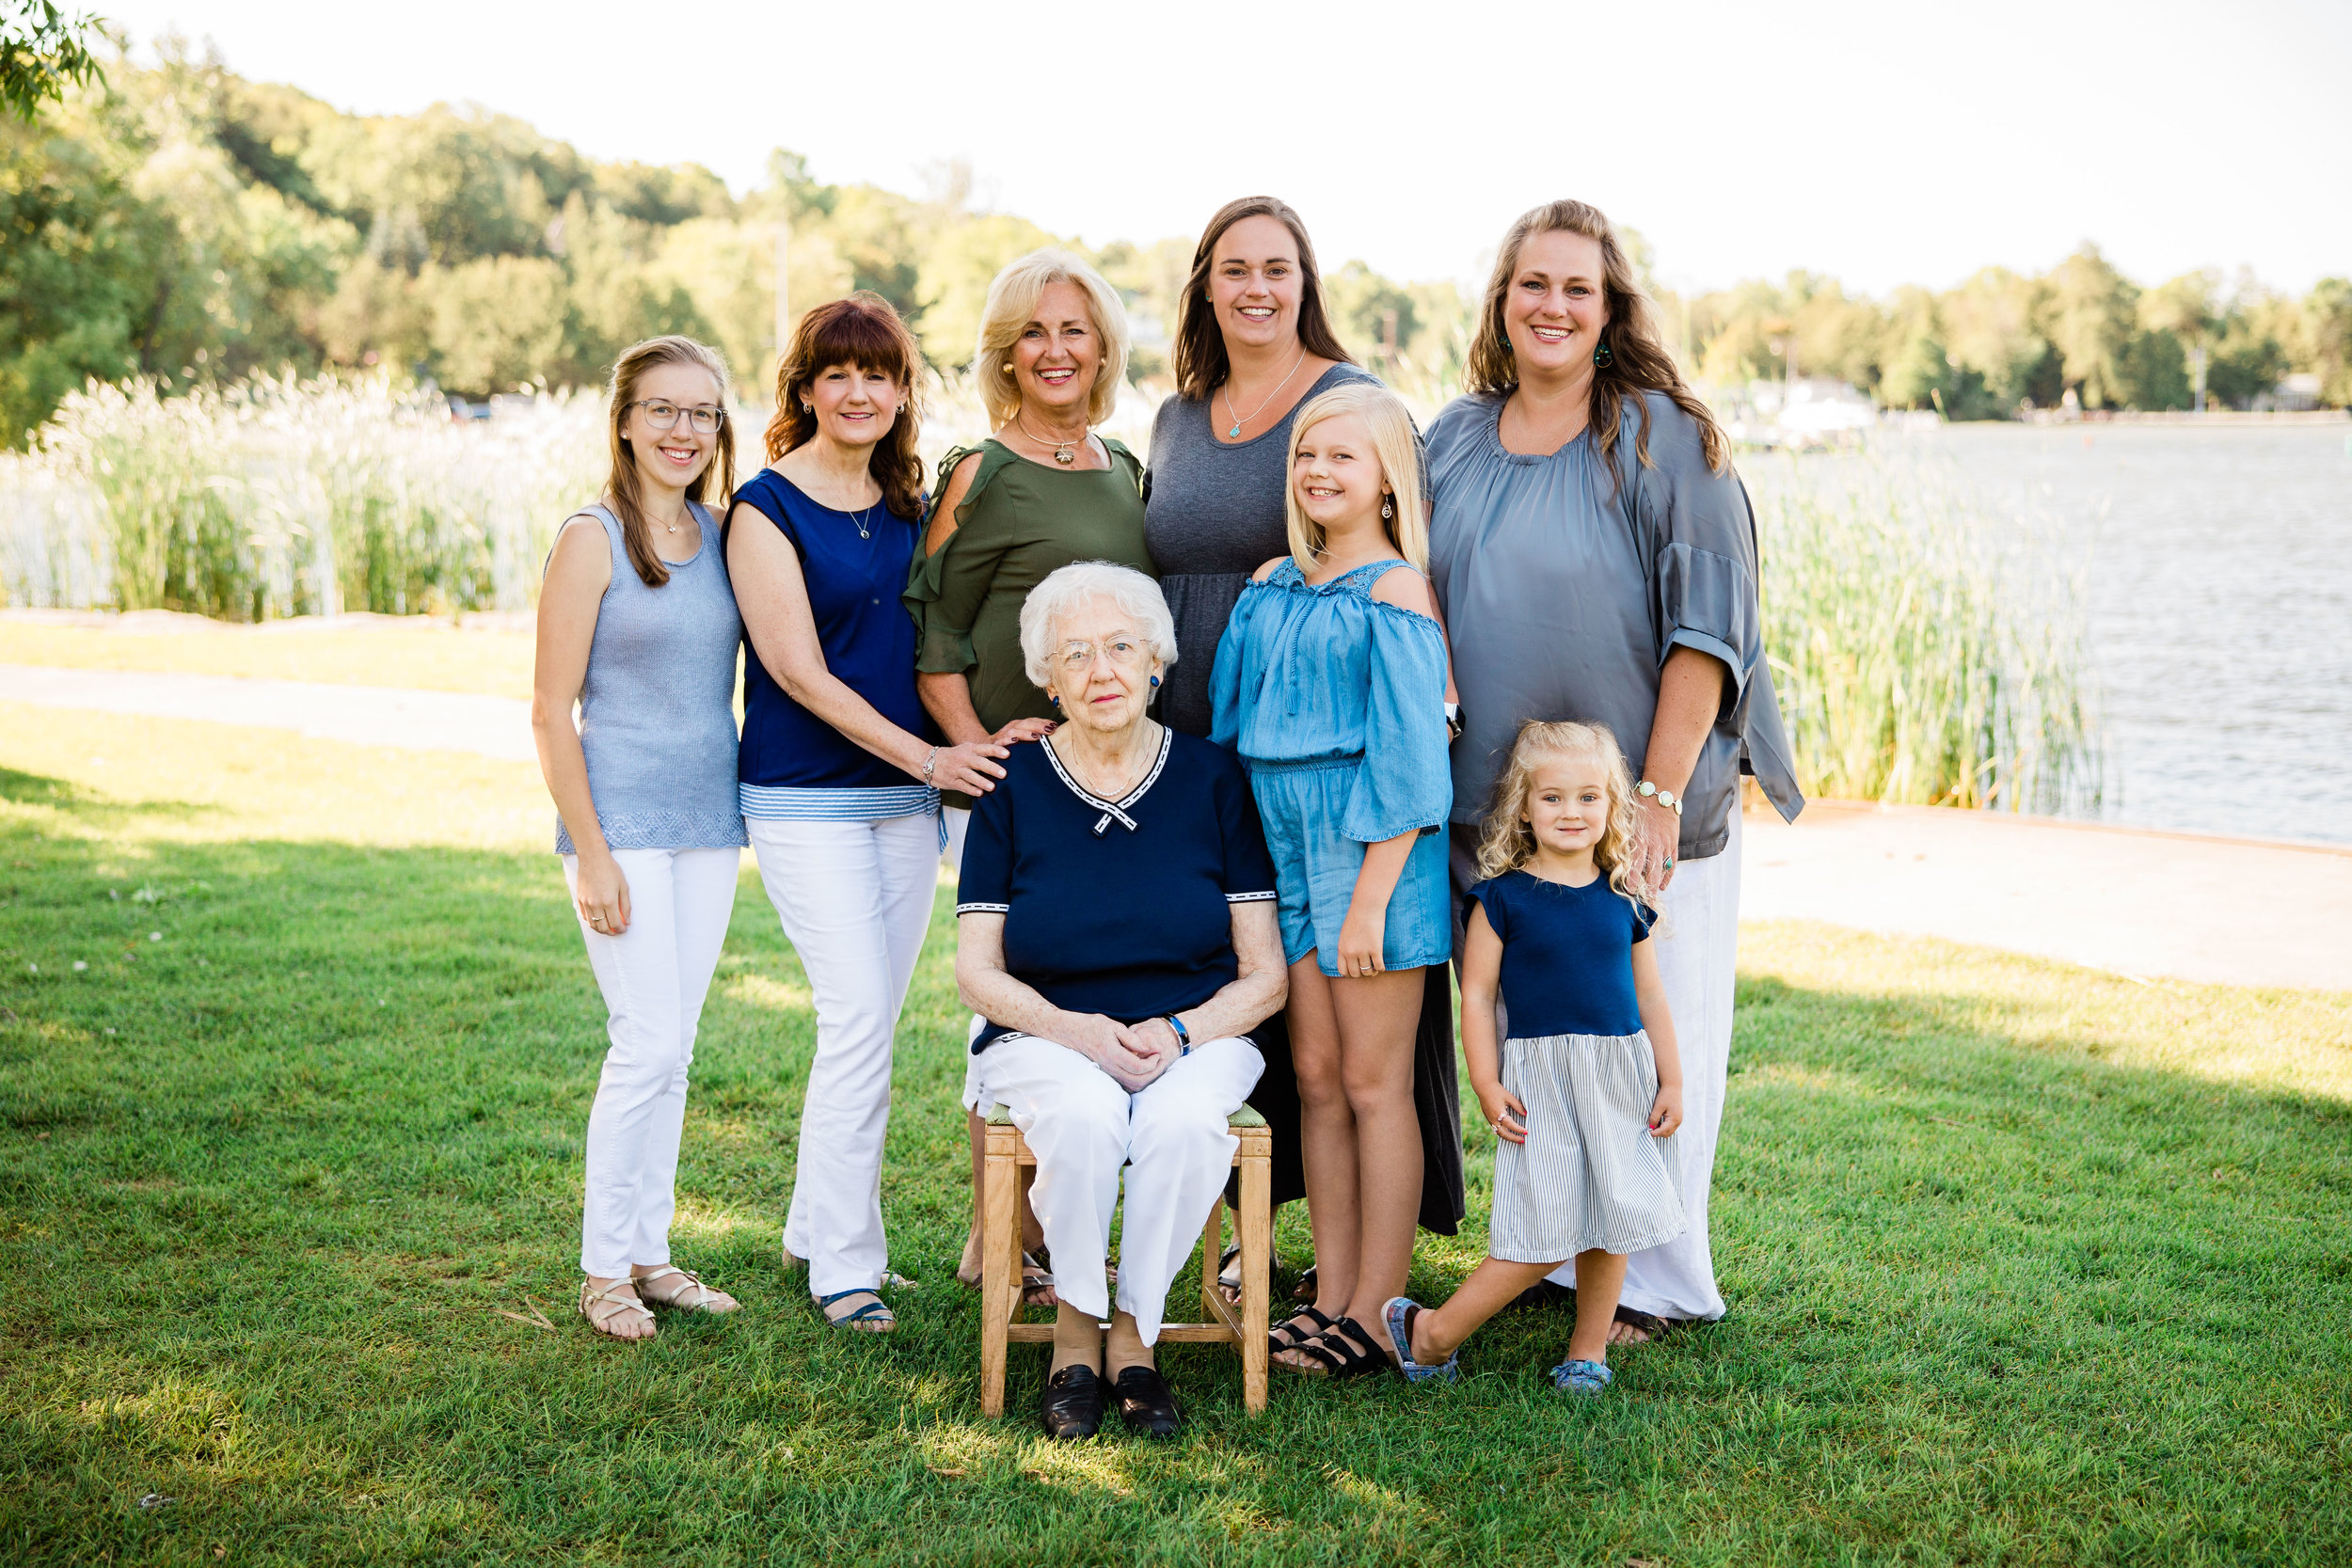 Four Generations of Women | All Over Ephraim Tandem Photography